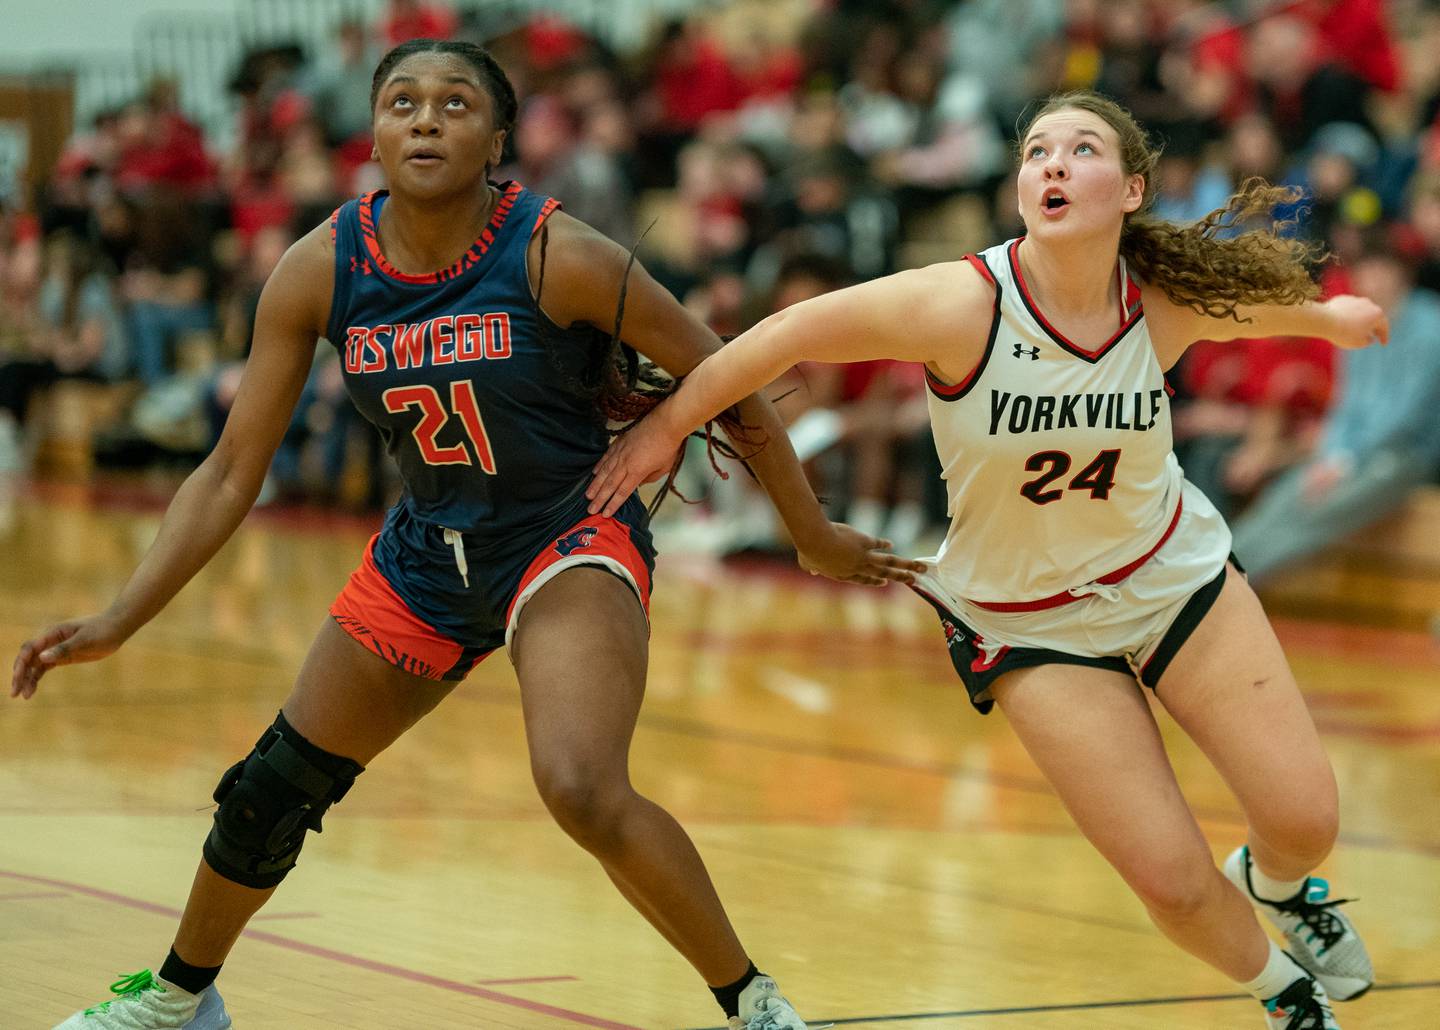 Oswego’s Kendall Fulton (21) and Yorkville's Ava Diqui (24) battle for position under the basket during the 13th annual Hoops 4 Hope Communities vs. Cancer basketball event at Yorkville High School on Saturday, Jan 28, 2023.